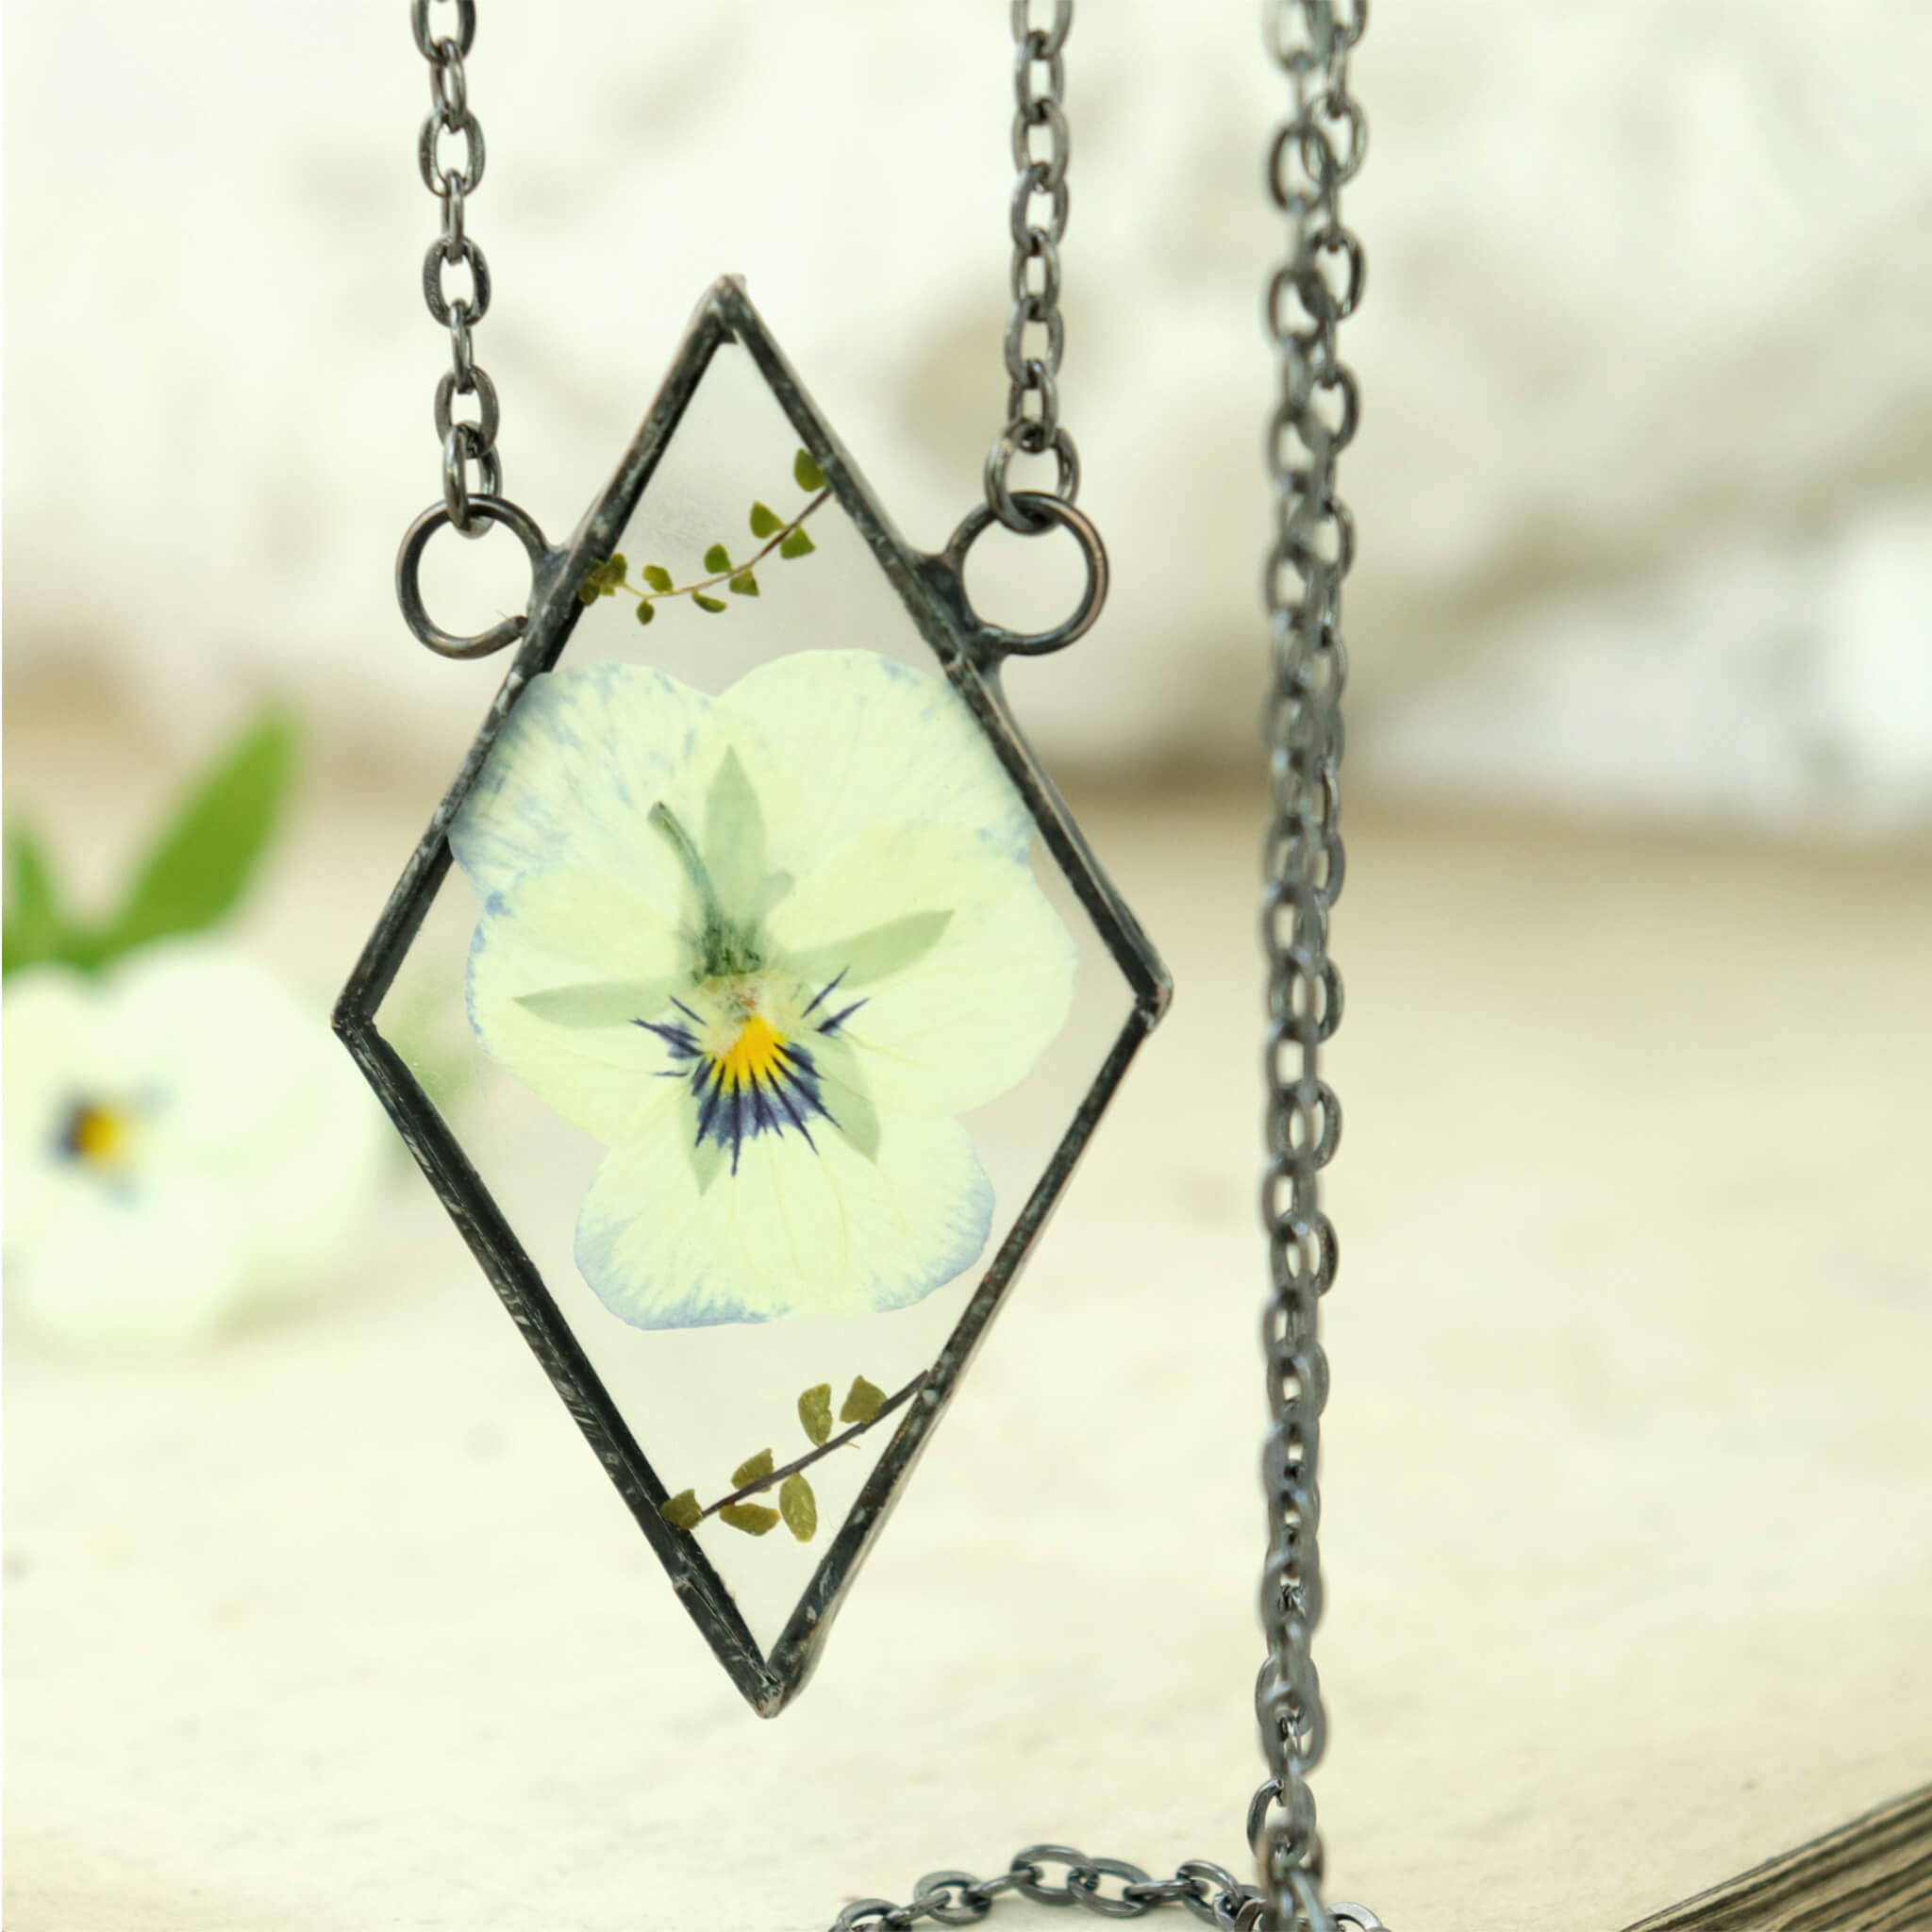 Pansy necklace in triangular shape